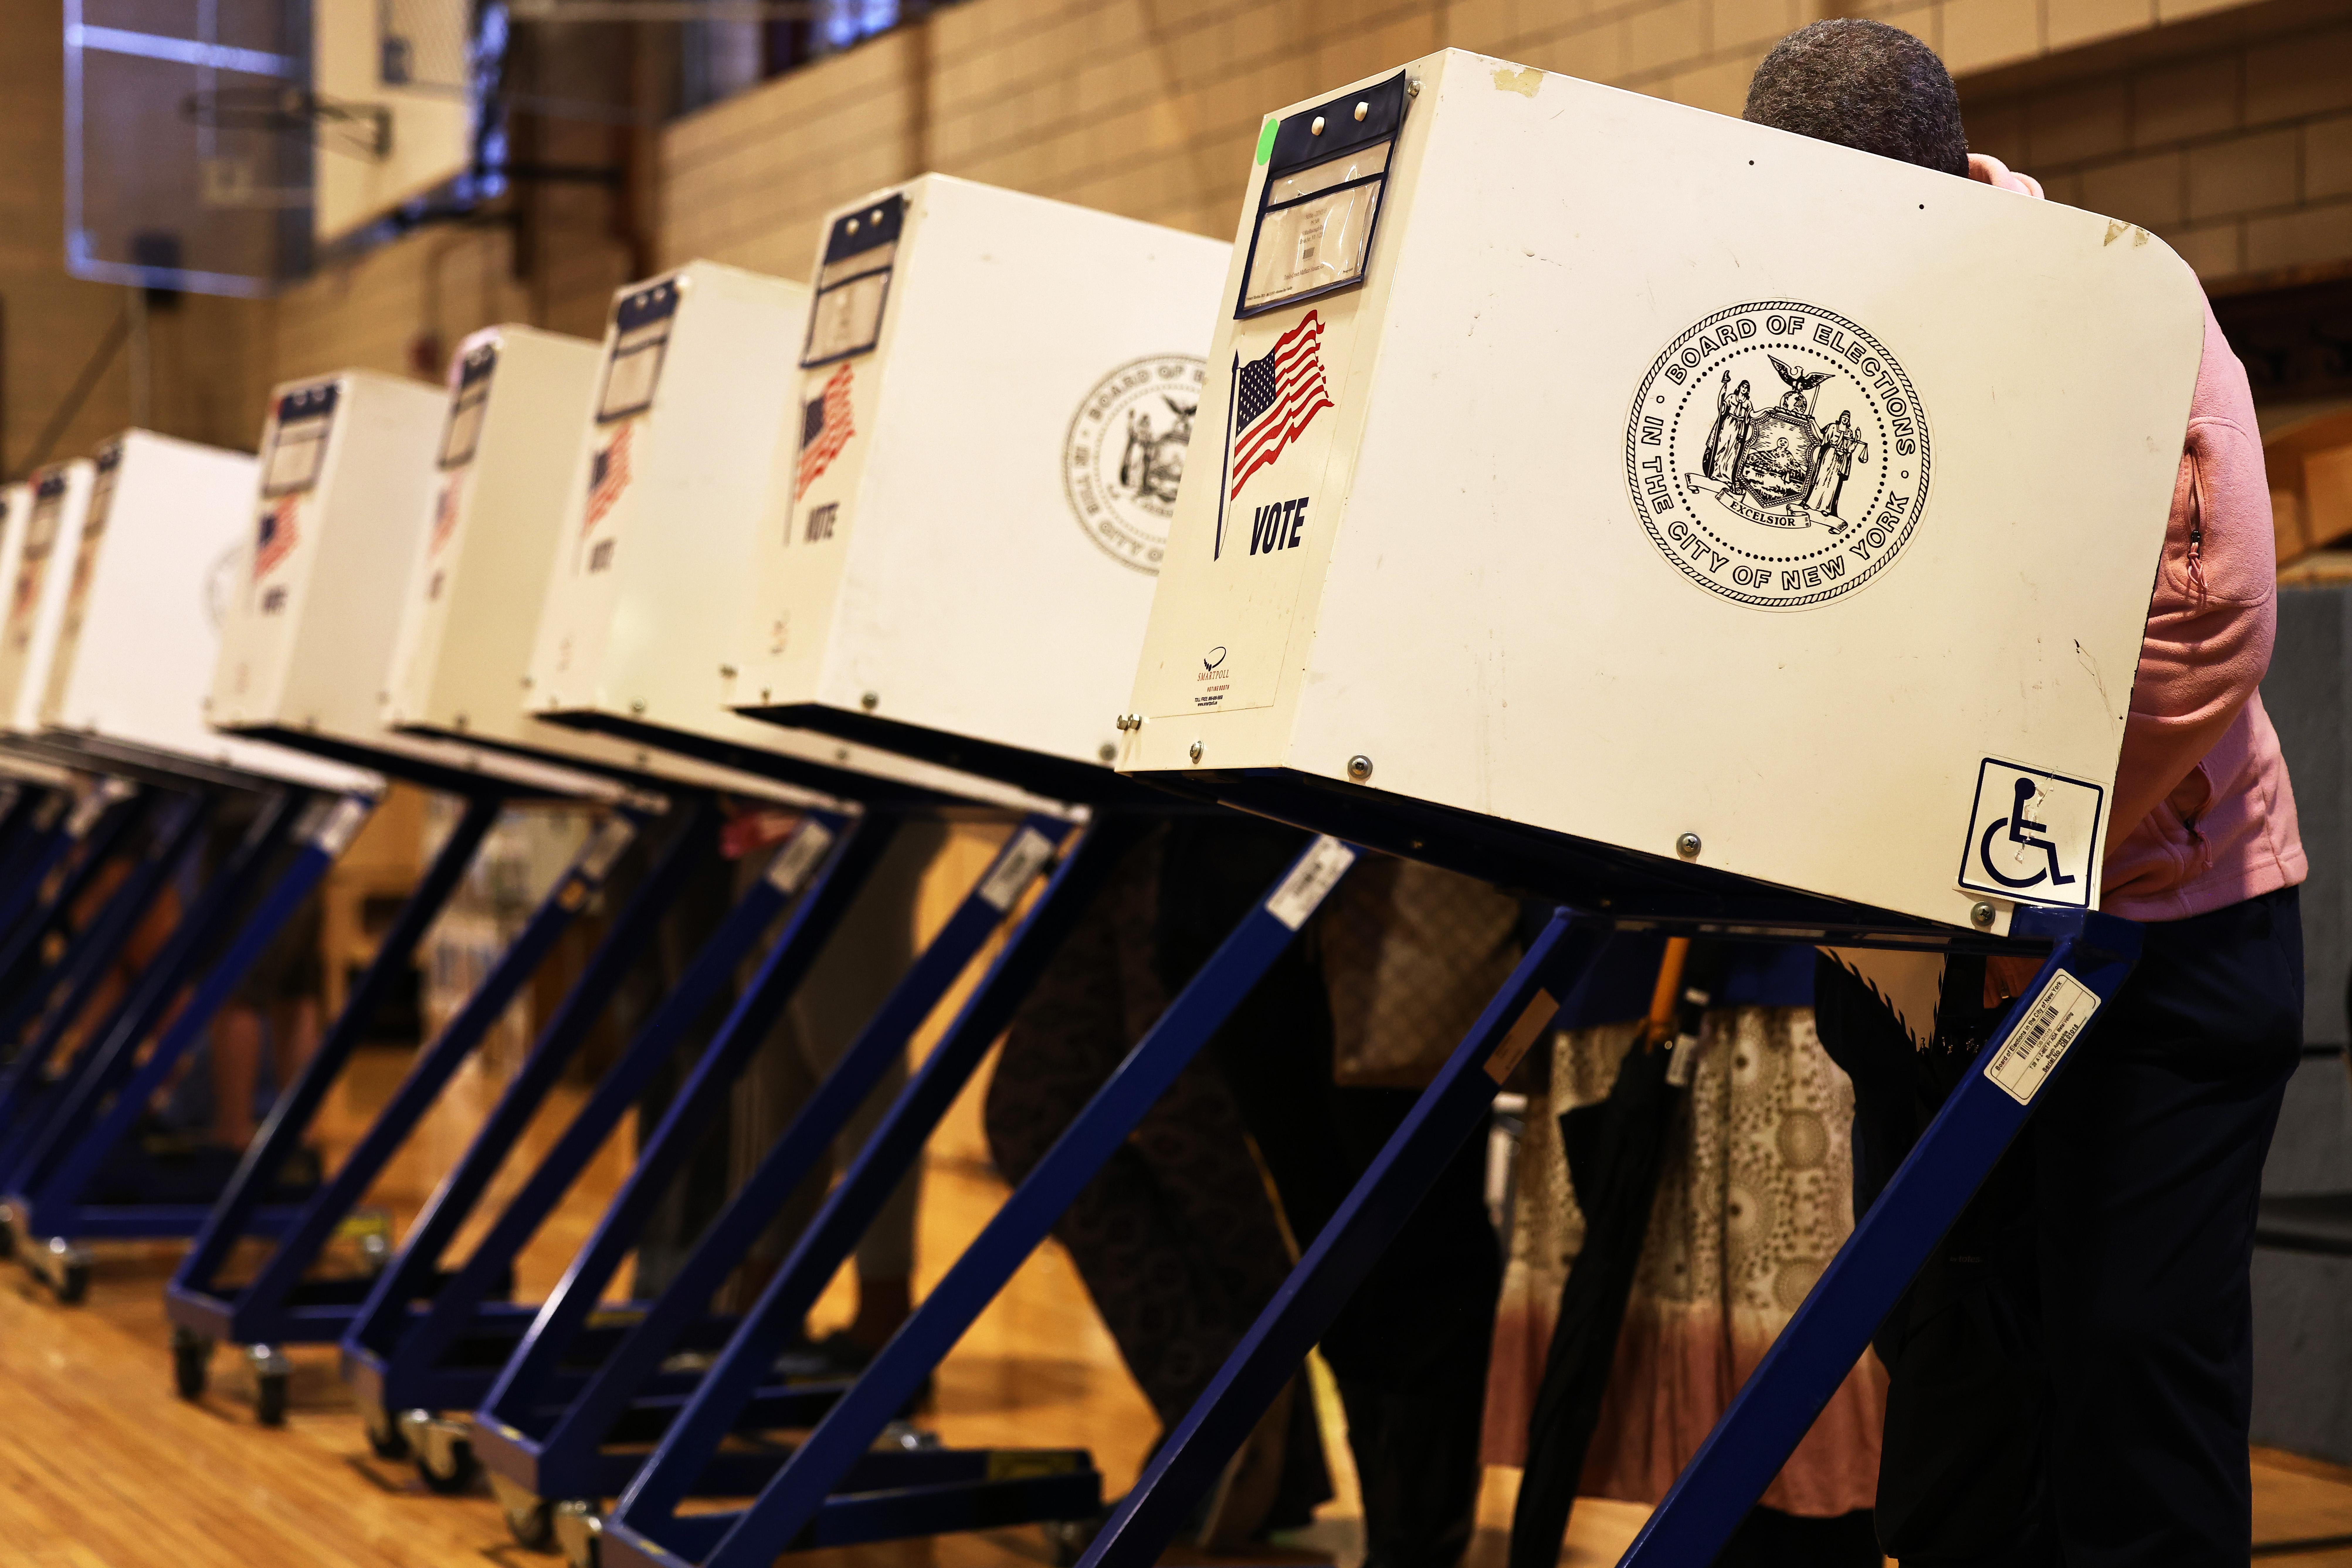 A row of people voting in voting booths indoors